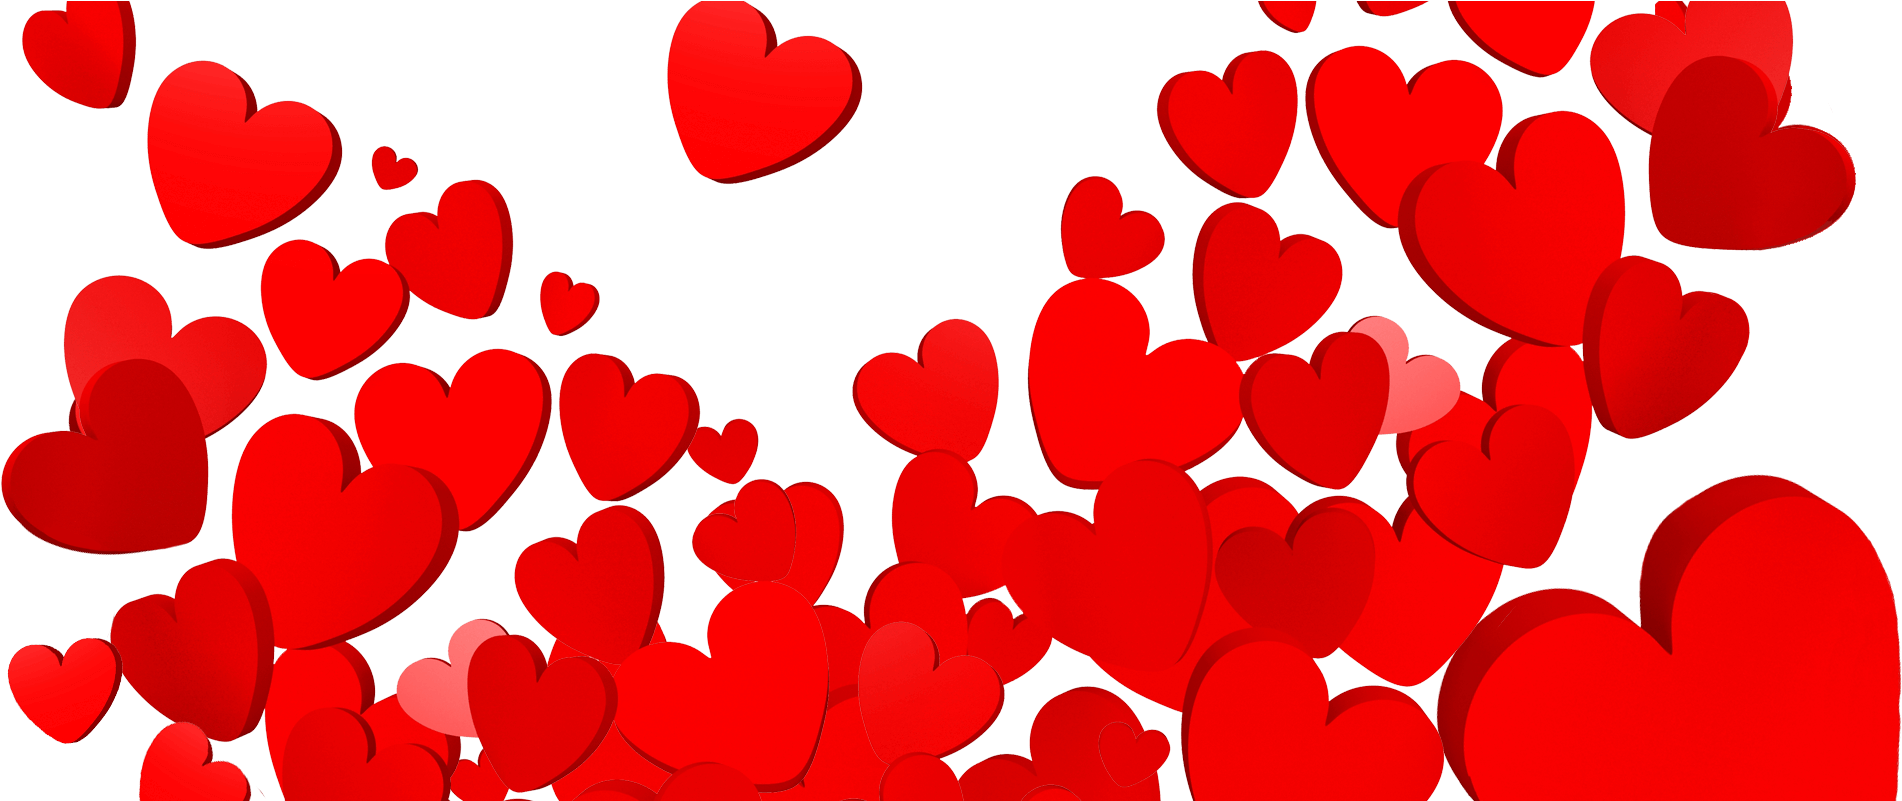 A Group Of Red Hearts